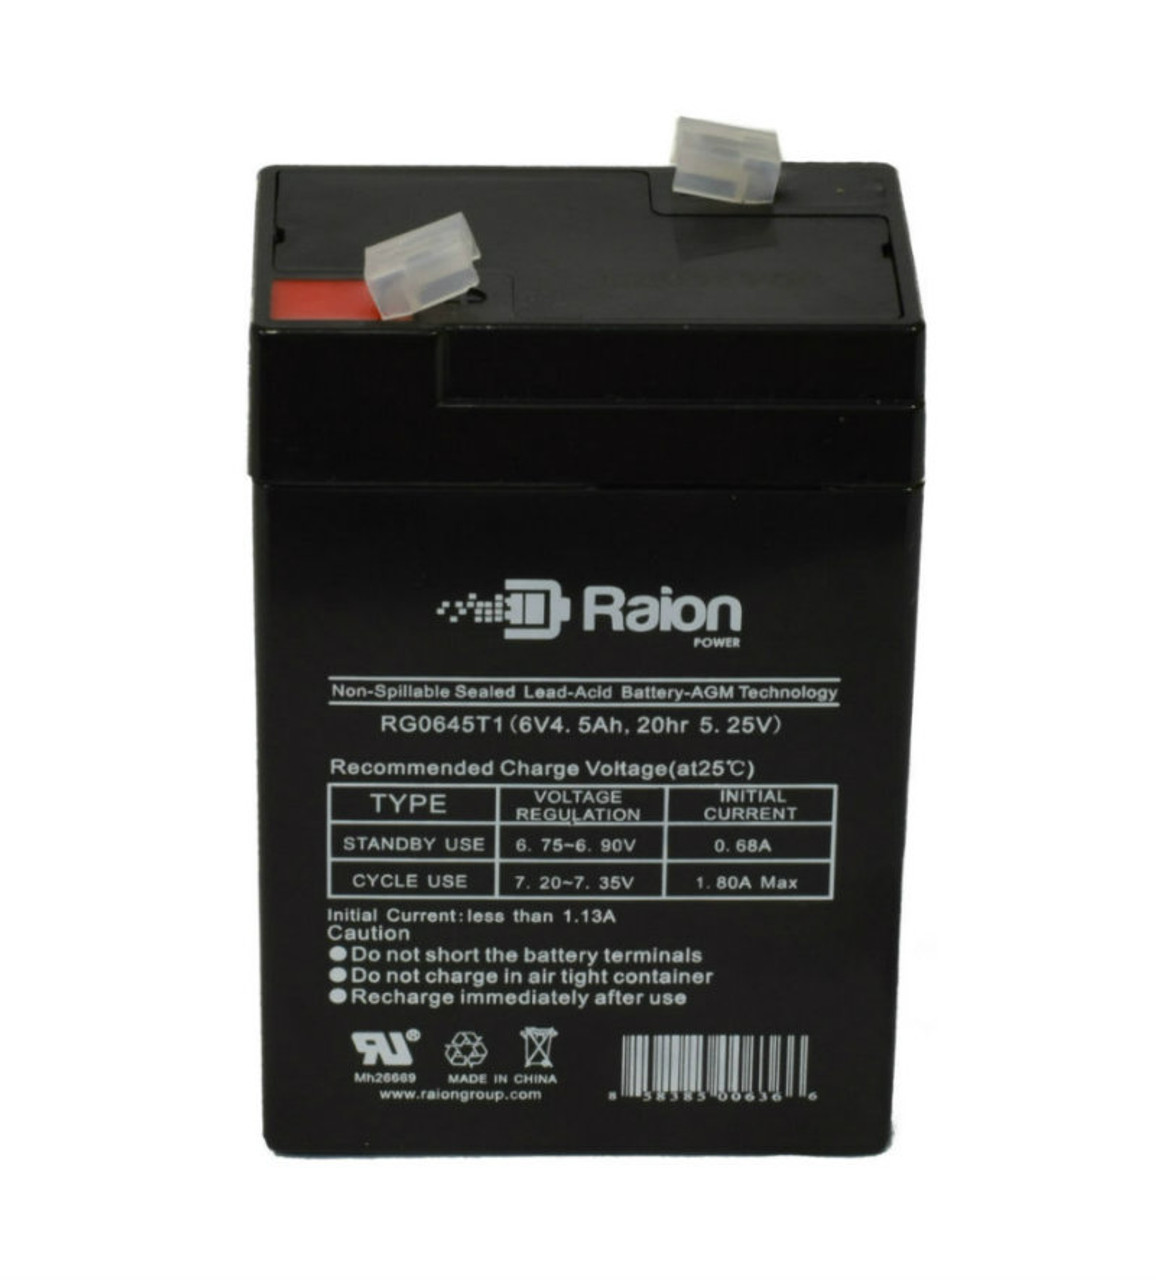 Raion Power RG0645T1 Replacement Battery Cartridge for National Power Corporation GS012P3